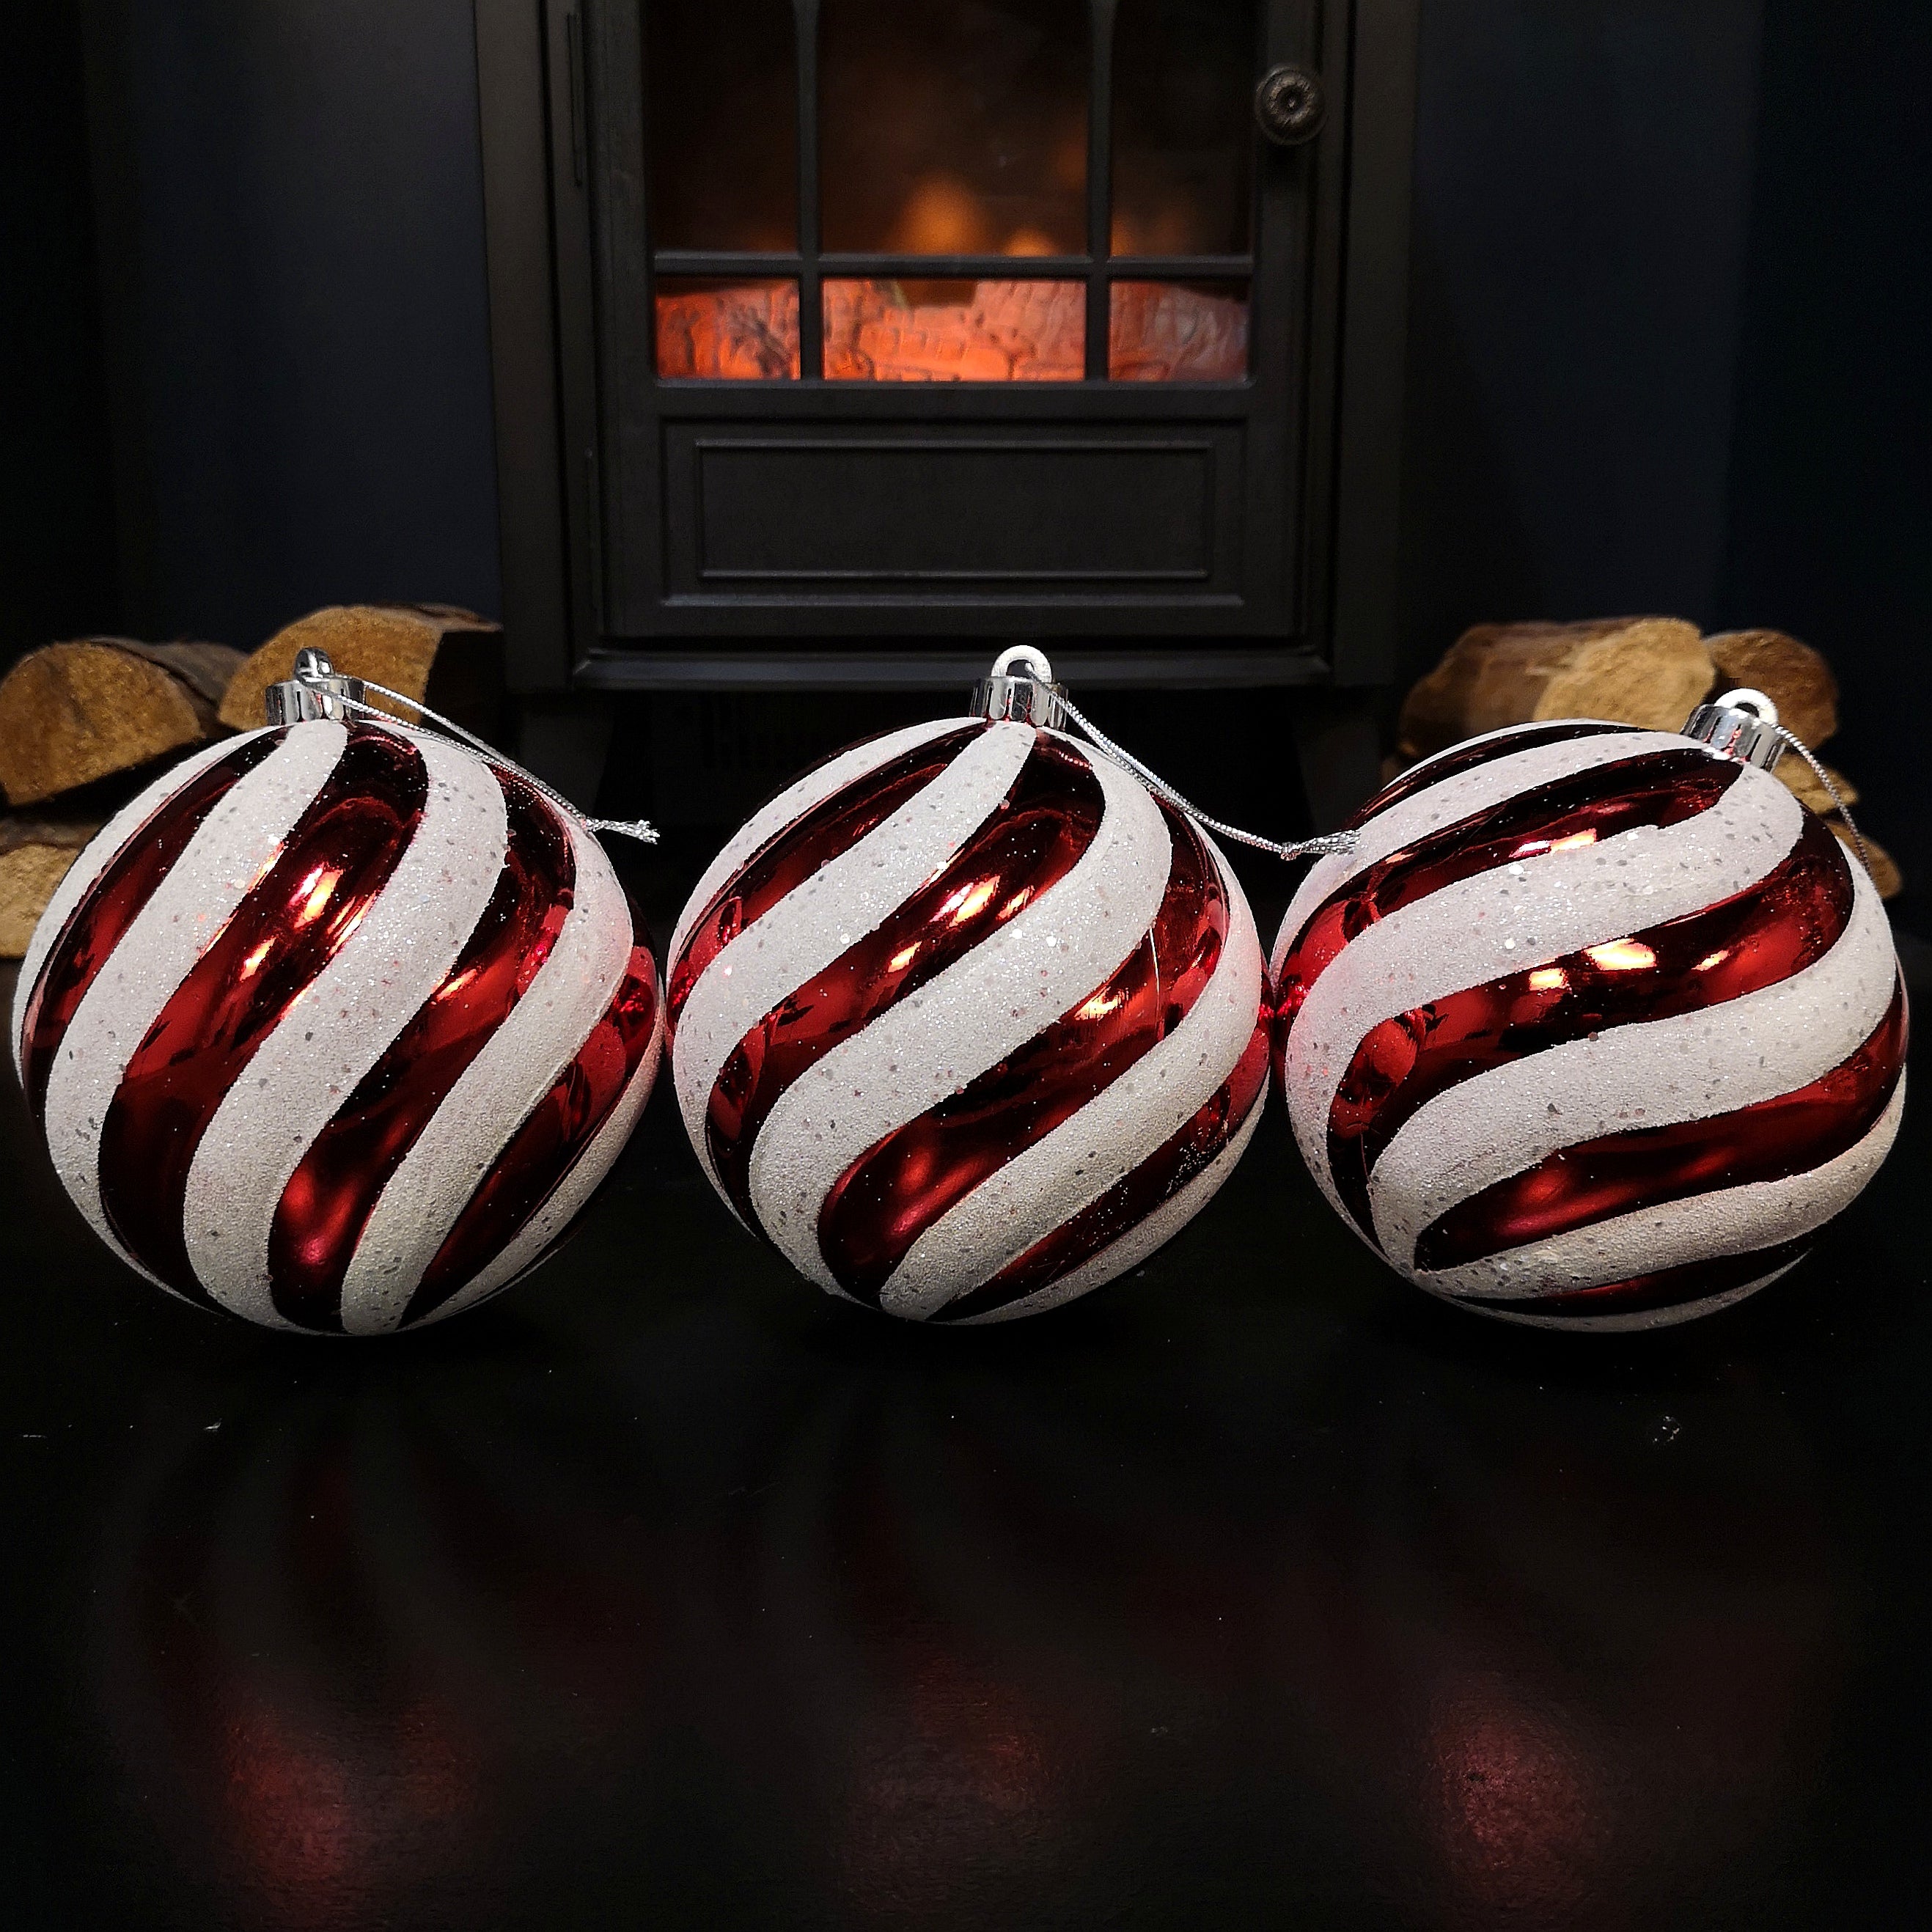 Pack of 3 Large Red & White Candy Cane Shatterproof Christmas Baubles Decorations